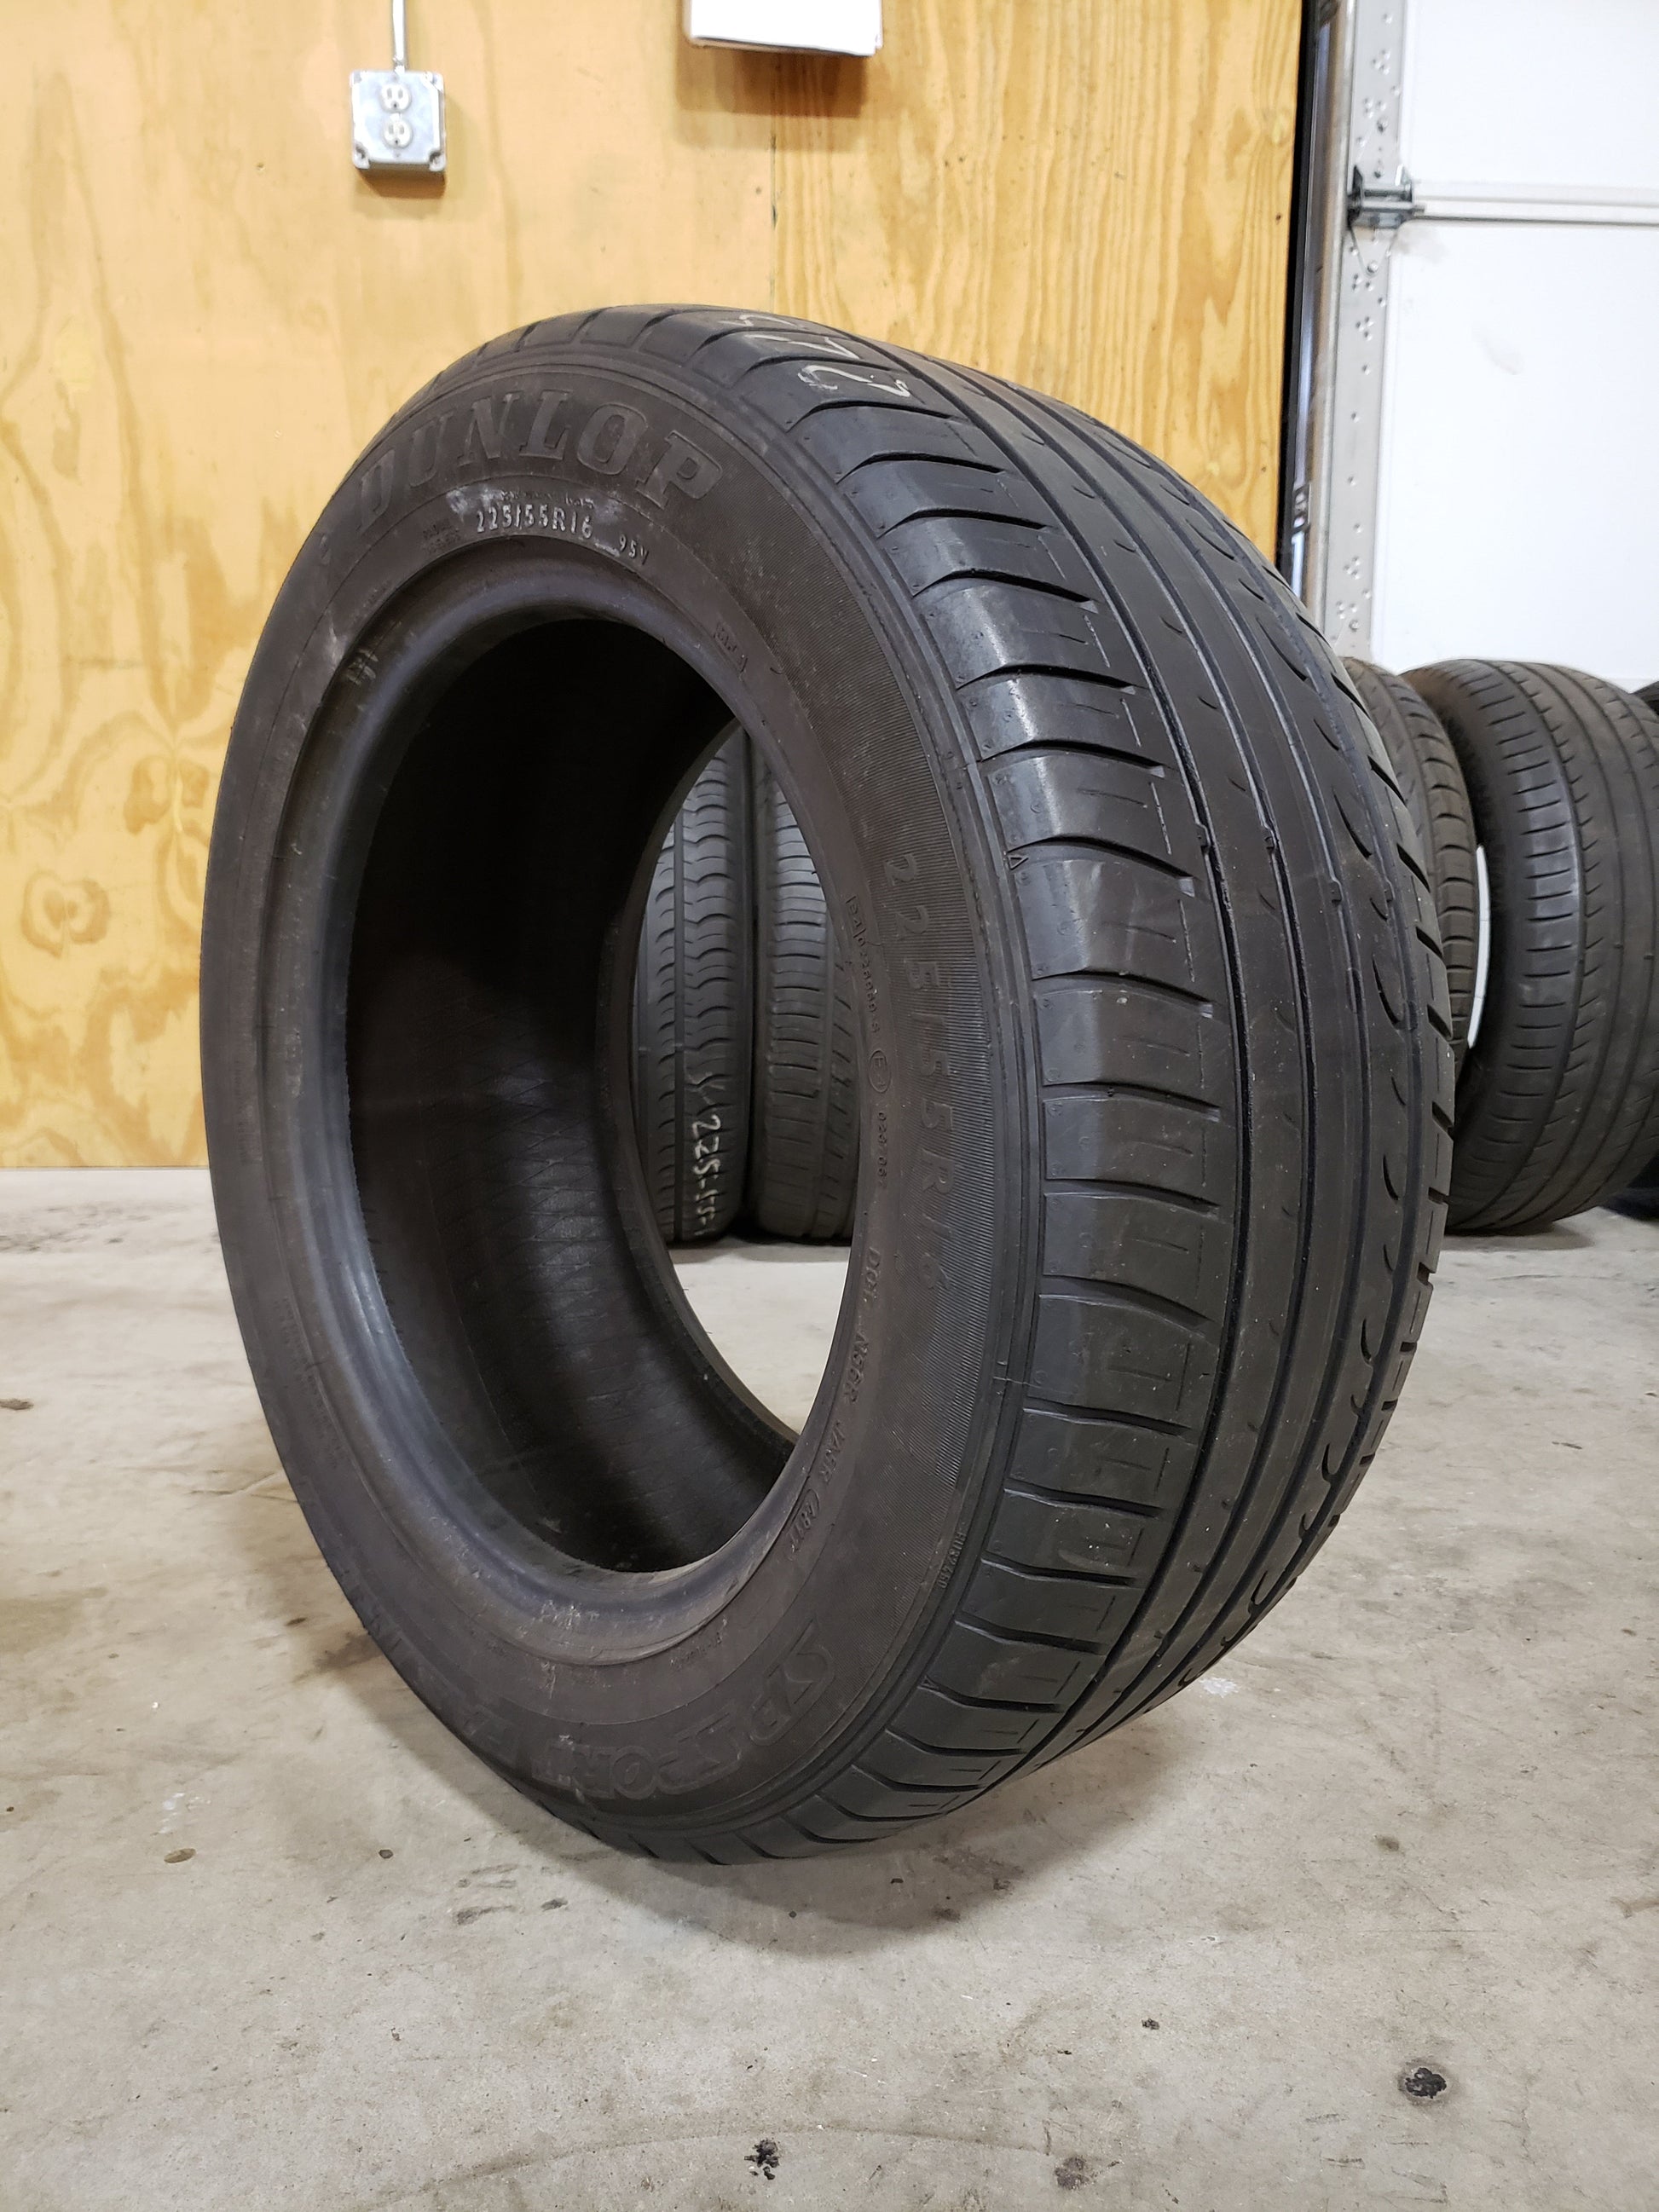 SINGLE 225/55R16 Dunlop Tires Used Response SP Used Tires Tread 95V – Sport Fast | - XL High